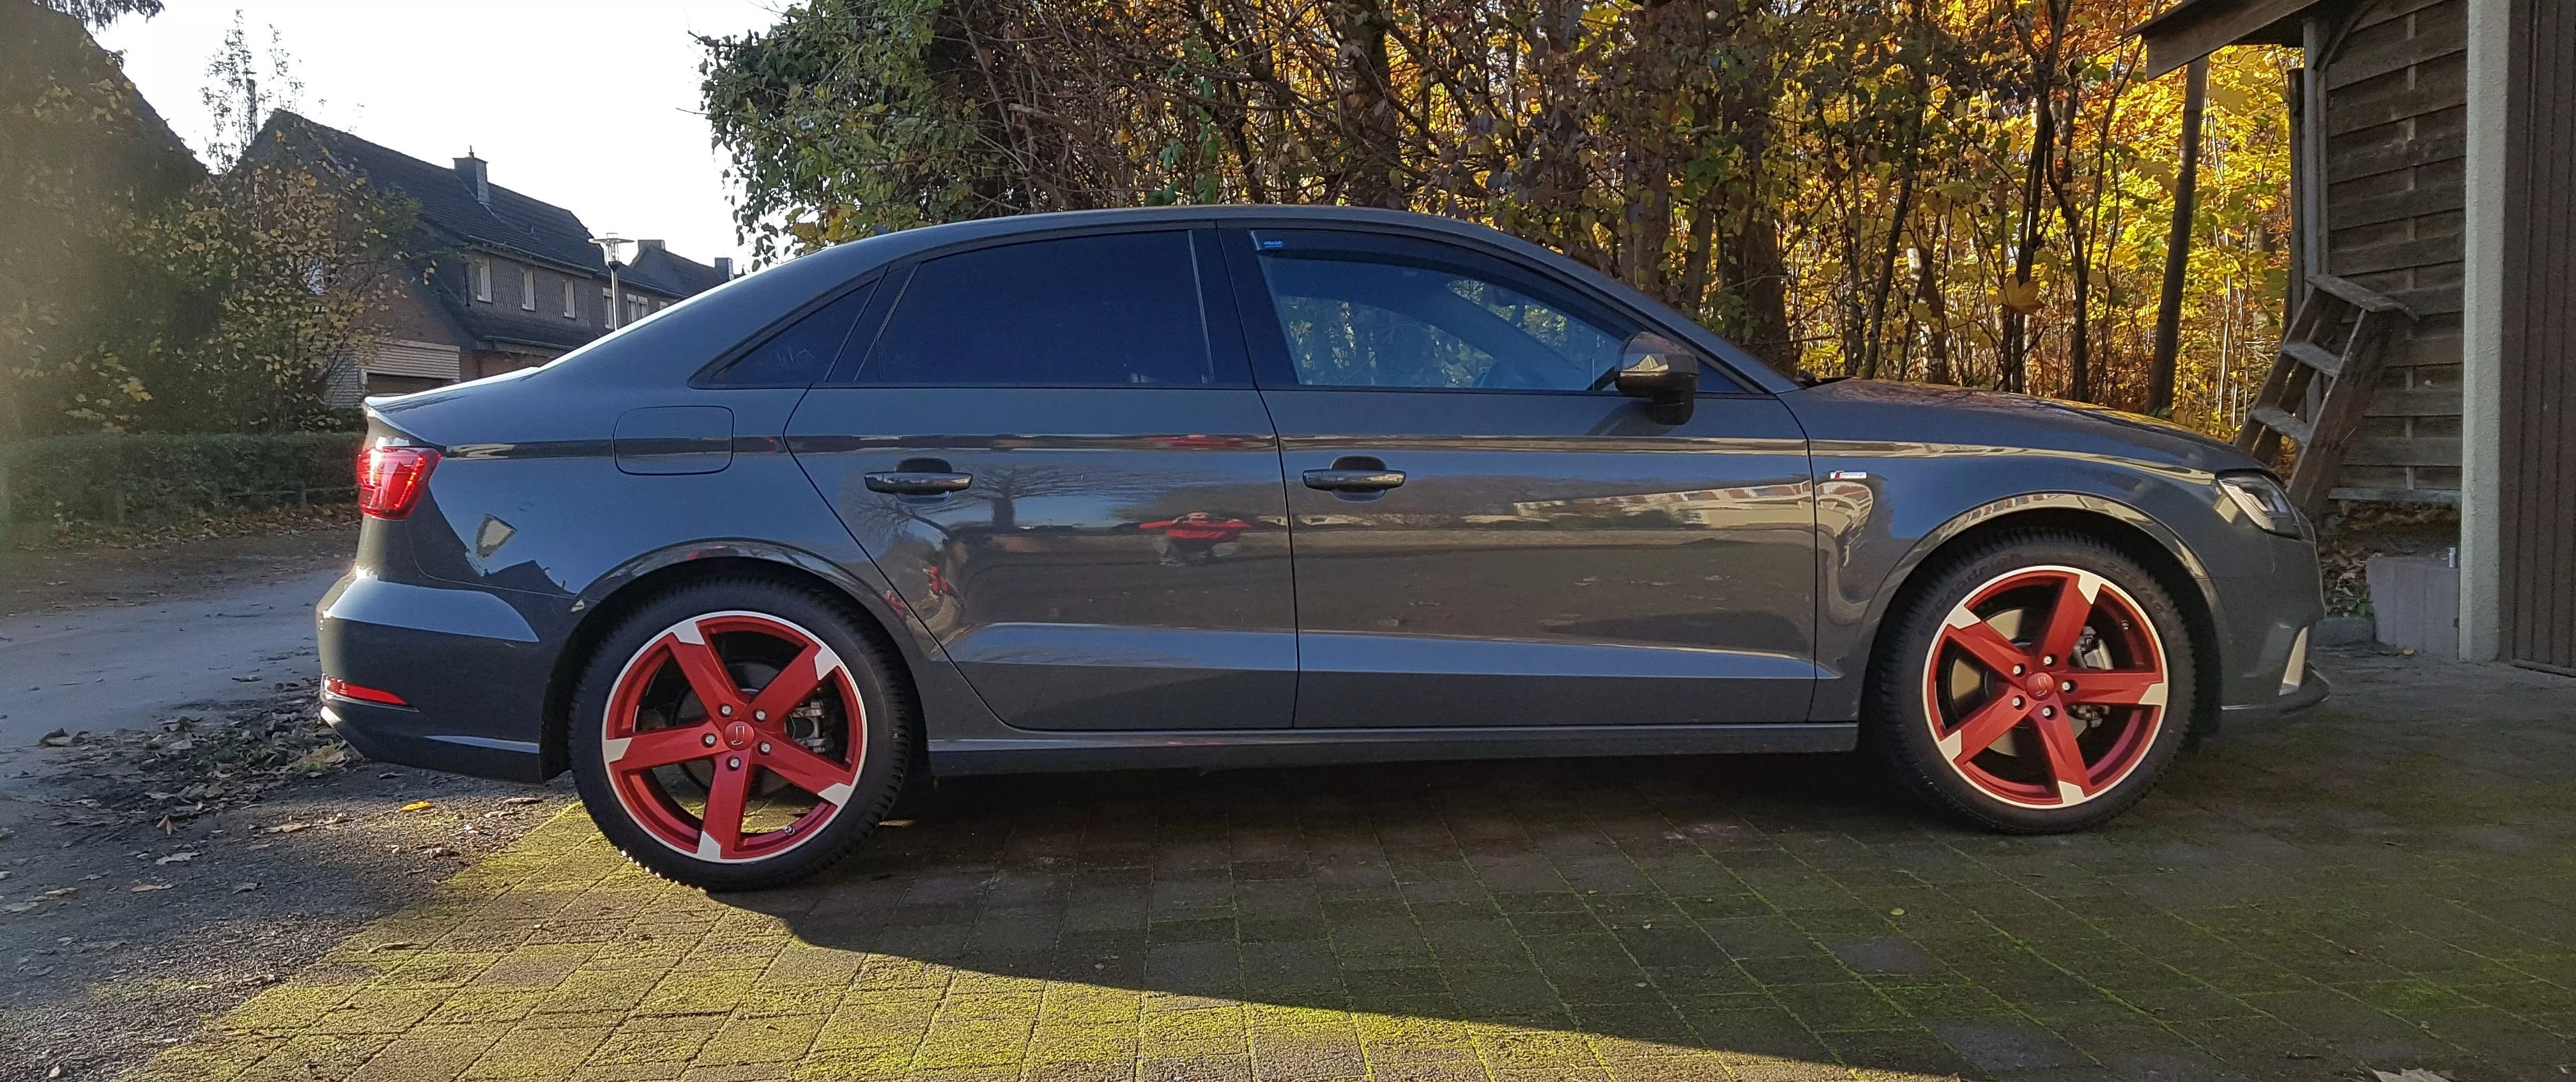 Audi – A3 Limousine – RONDELL – 01 – Rot – 18 Zoll